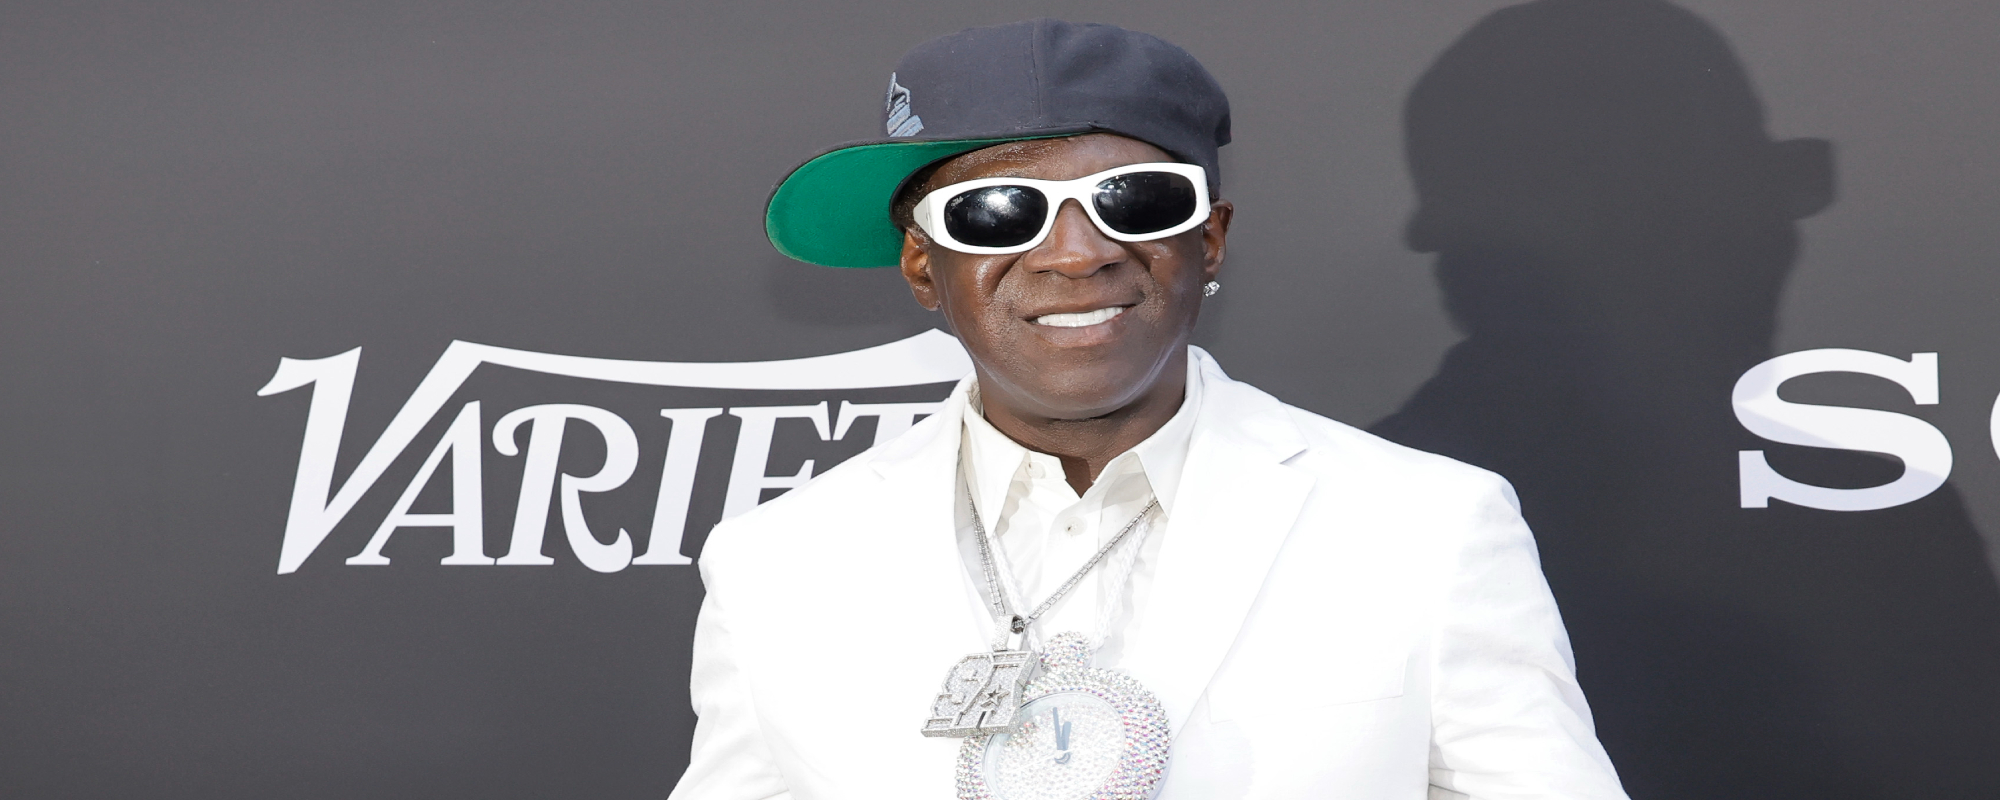 Flavor Flav Can’t Stop Showing Off Gift Sent to Him by Taylor Swift Fans: “Thank You All of My Fellow Swifties”